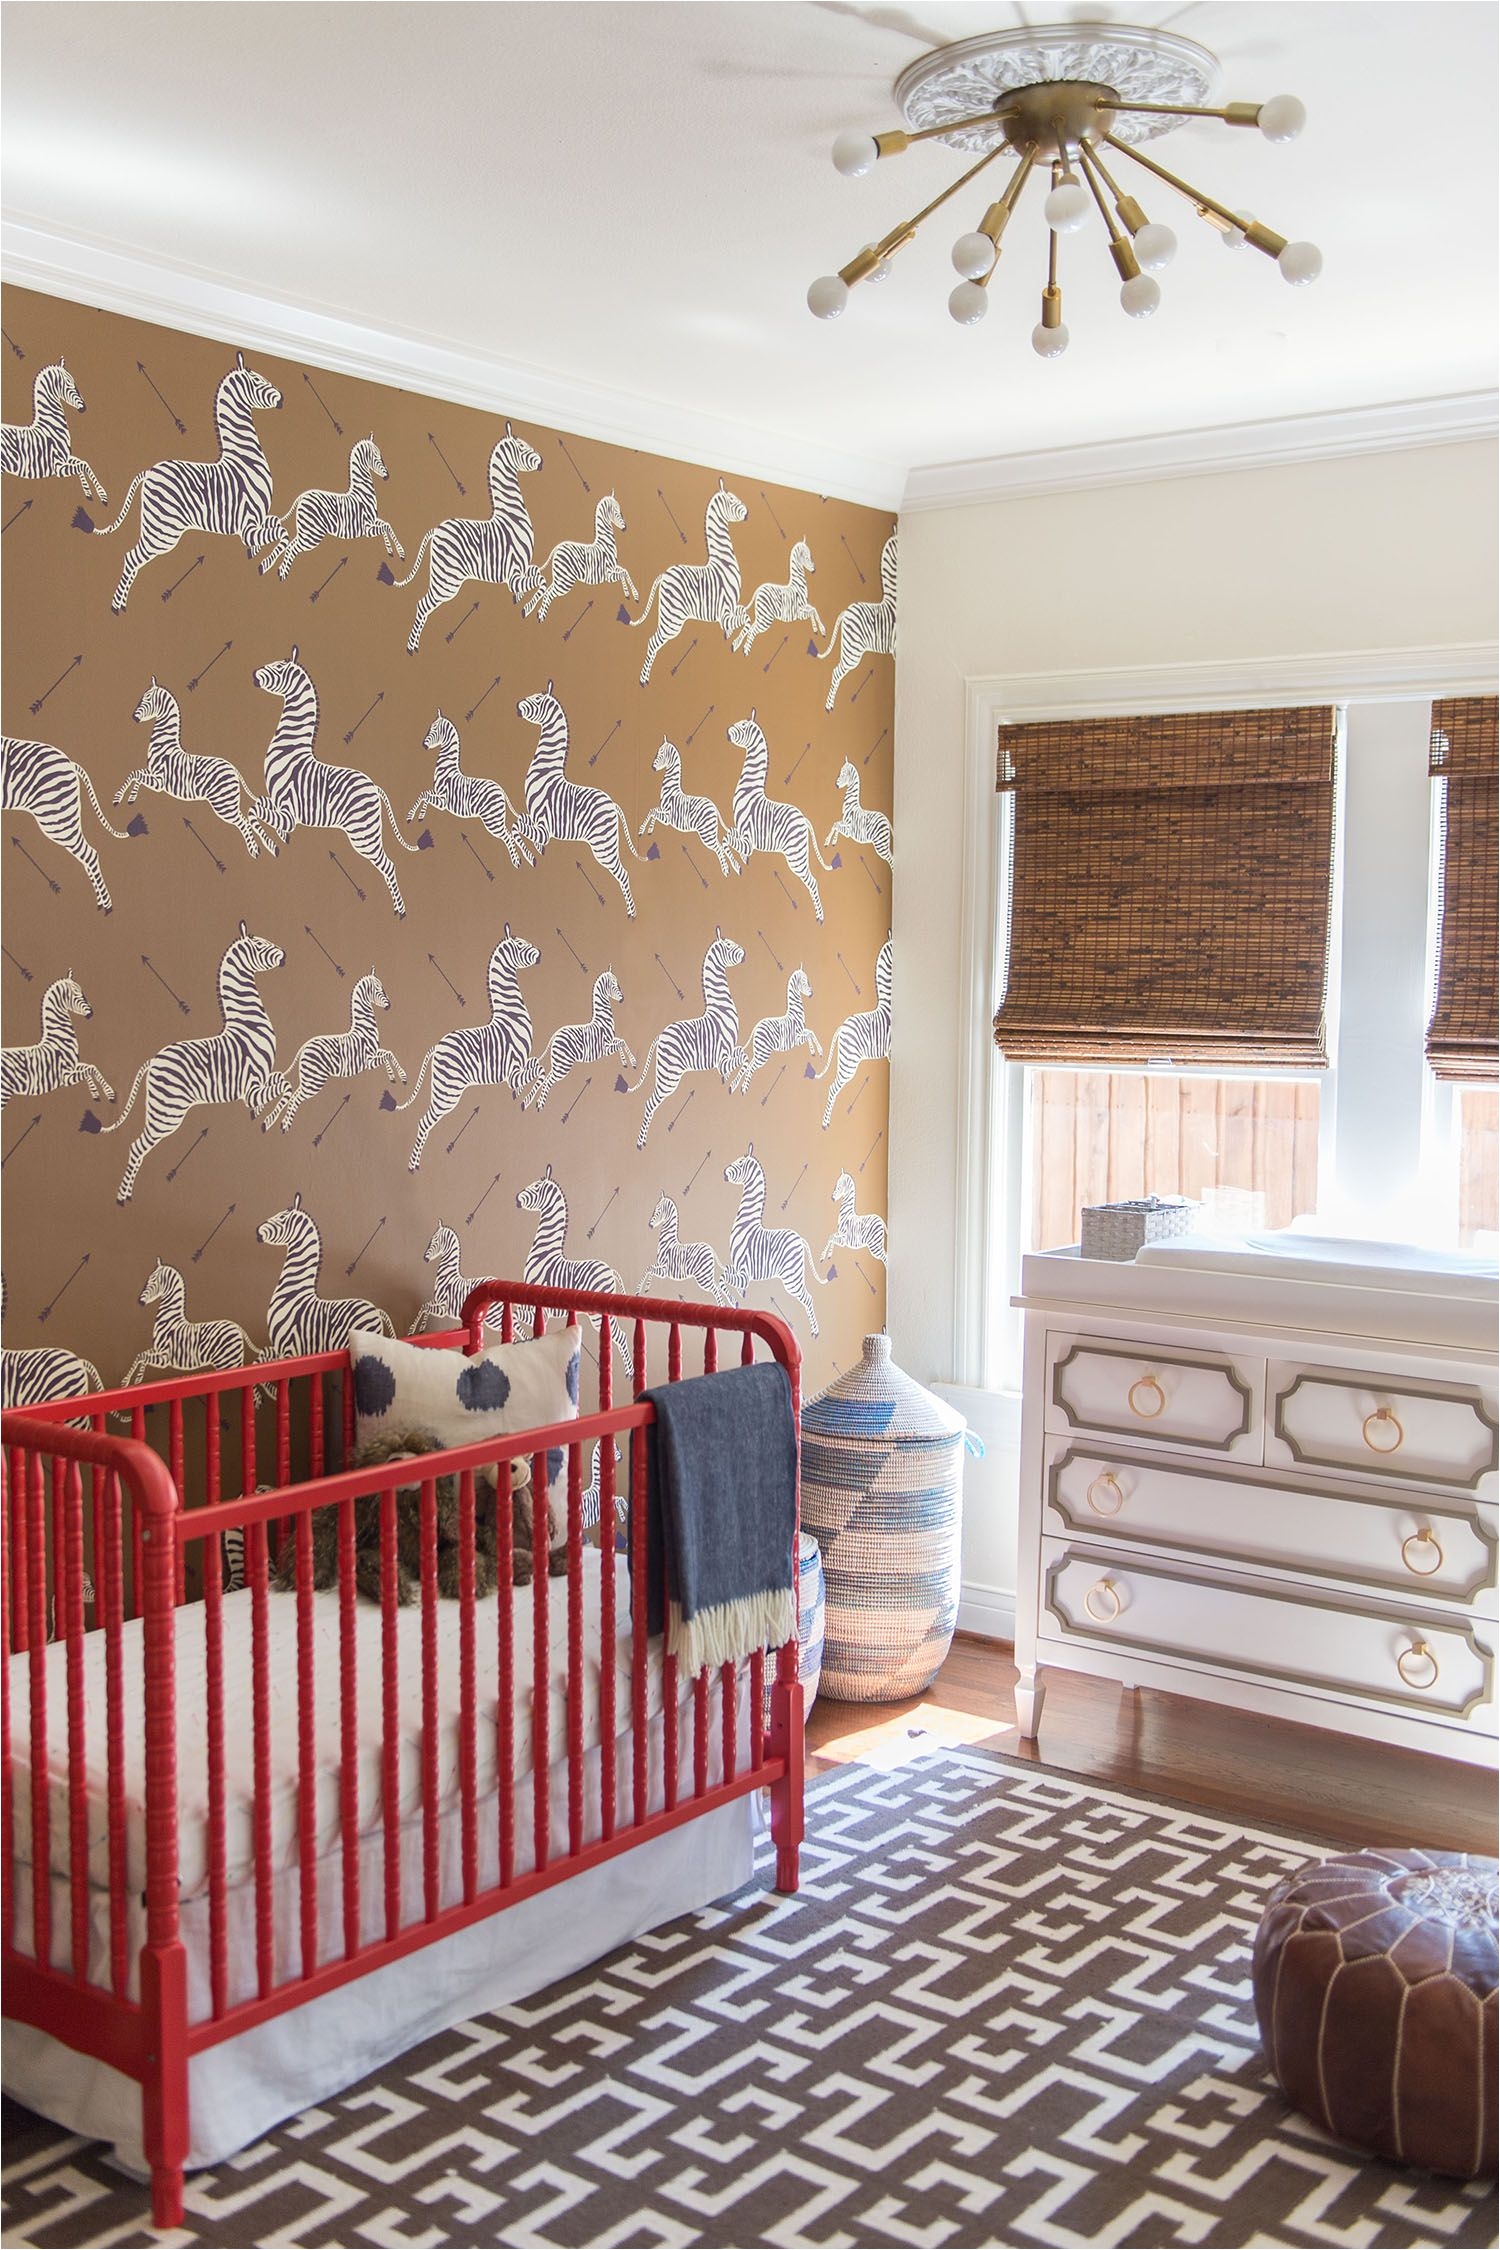 zebra wallpaper in nursery with gold light fixture and red crib